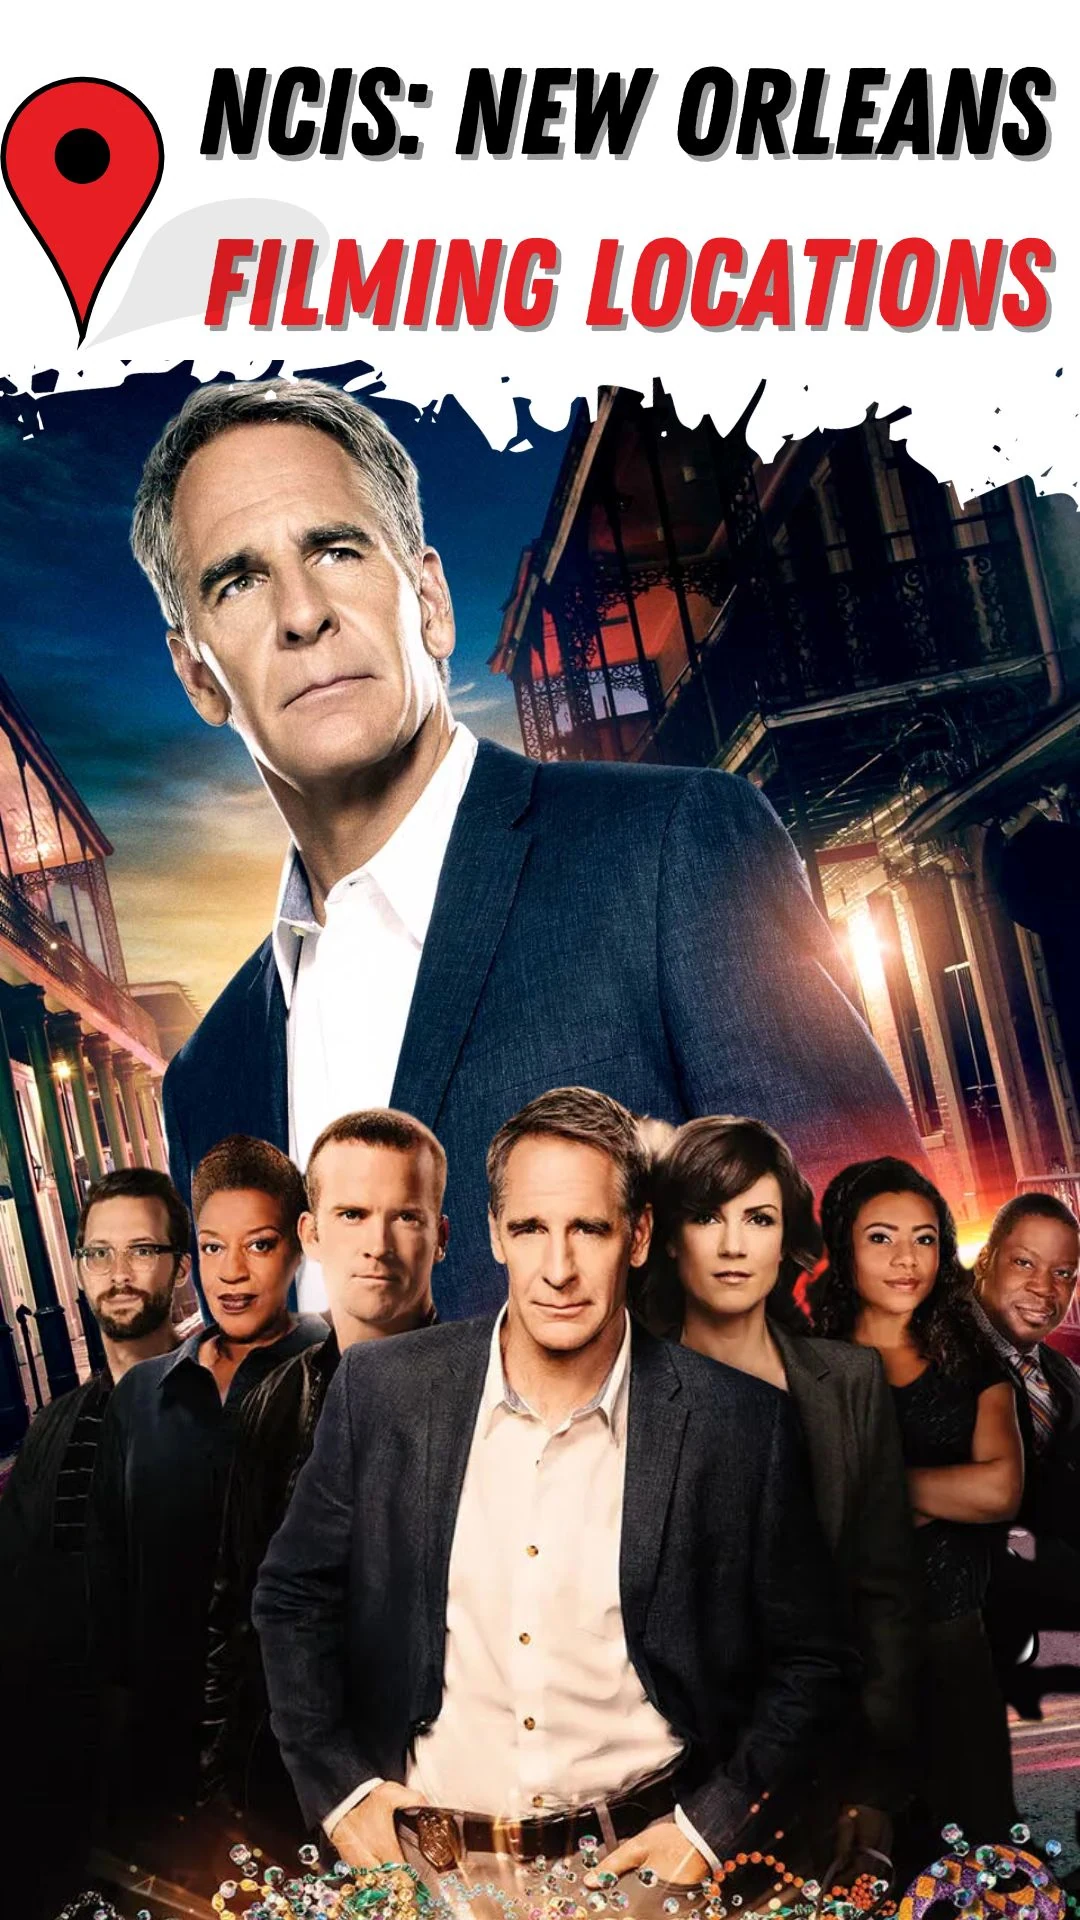 NCIS New Orleans Filming Locations (20142021)